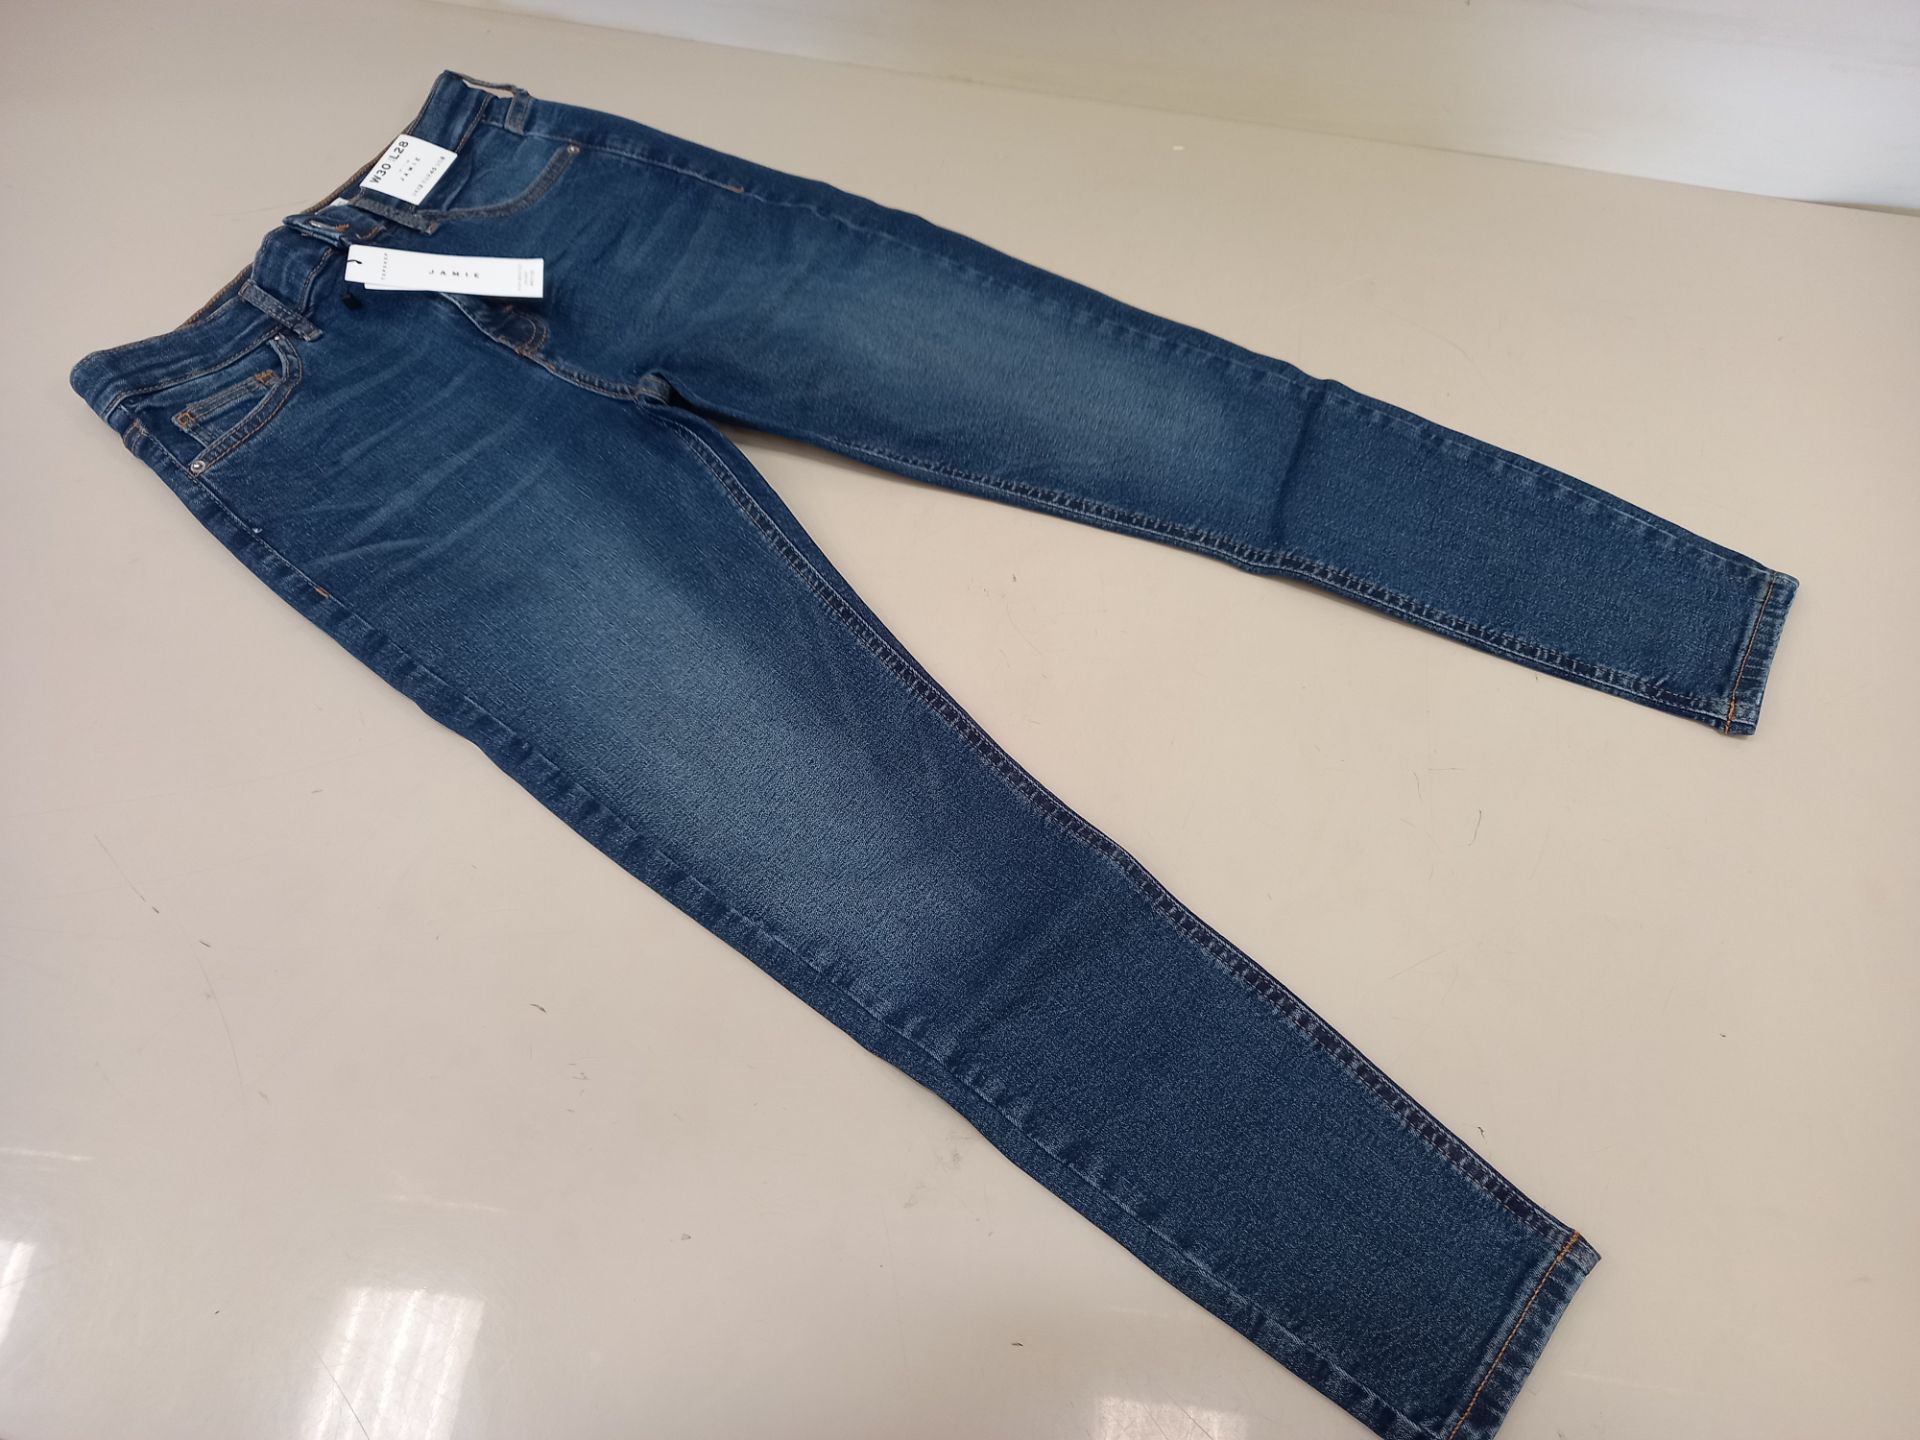 10 X BRAND NEW TOPSHOP JAMIE HIGH WAISTED SKINNY PETITE JEANS UK SIZE 12 RRP £40.00 (TOTAL RRP £